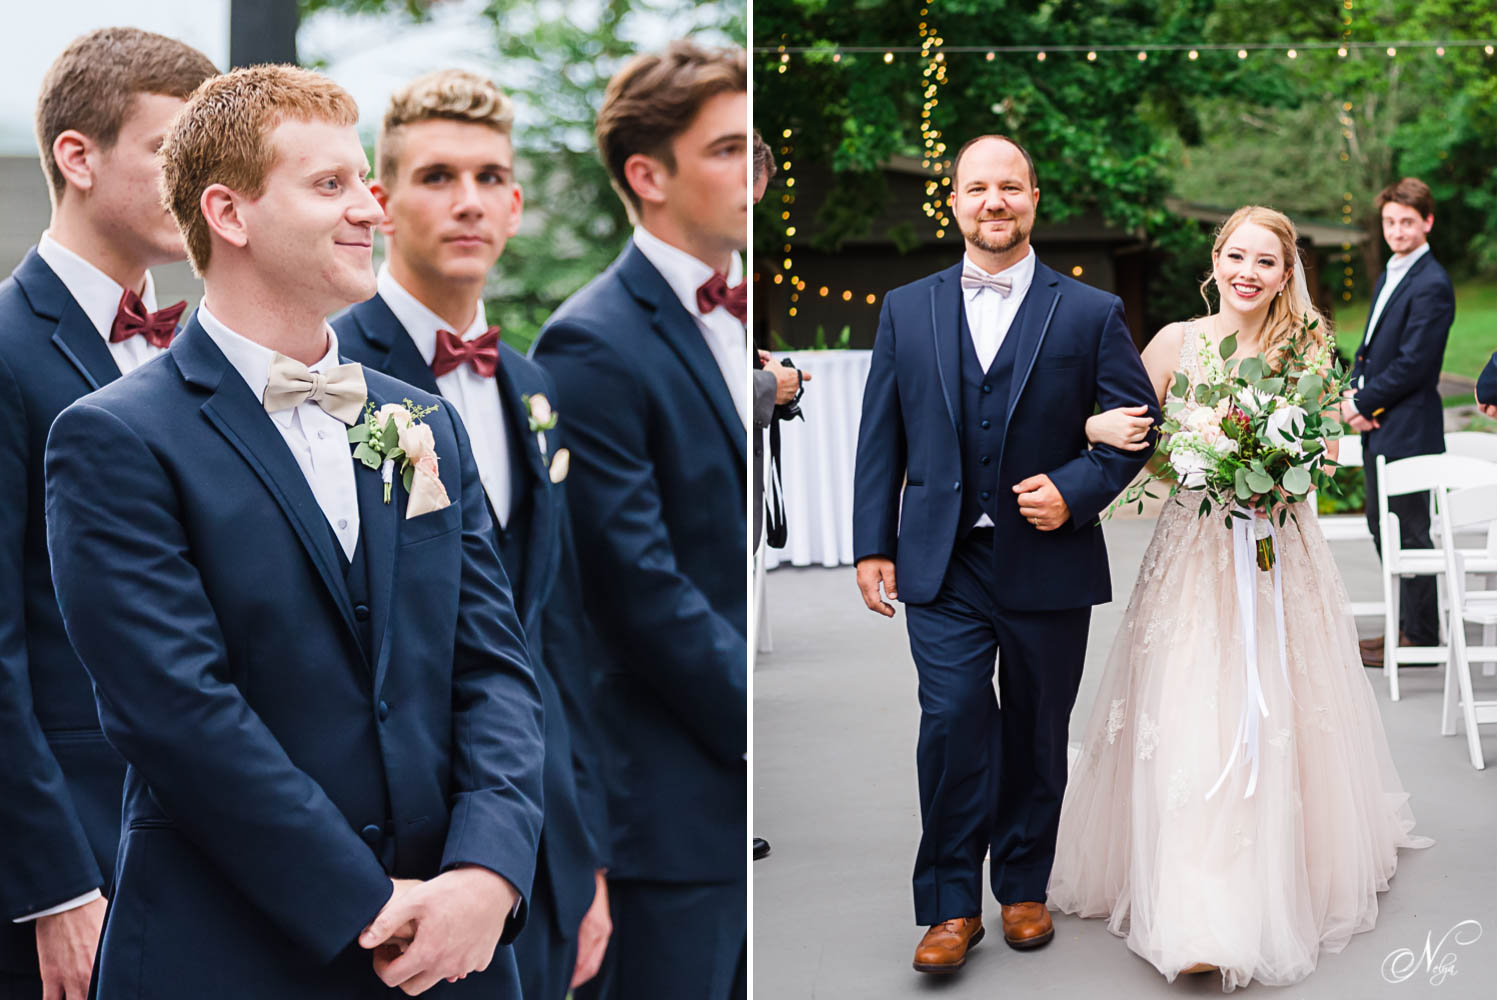 red headed groom in navy suit and cream colored bowtie seeing his bride walk down the aisle. And bride and her dad walking down the aisle at the outdoor garden ceremony in Chattanooga TN